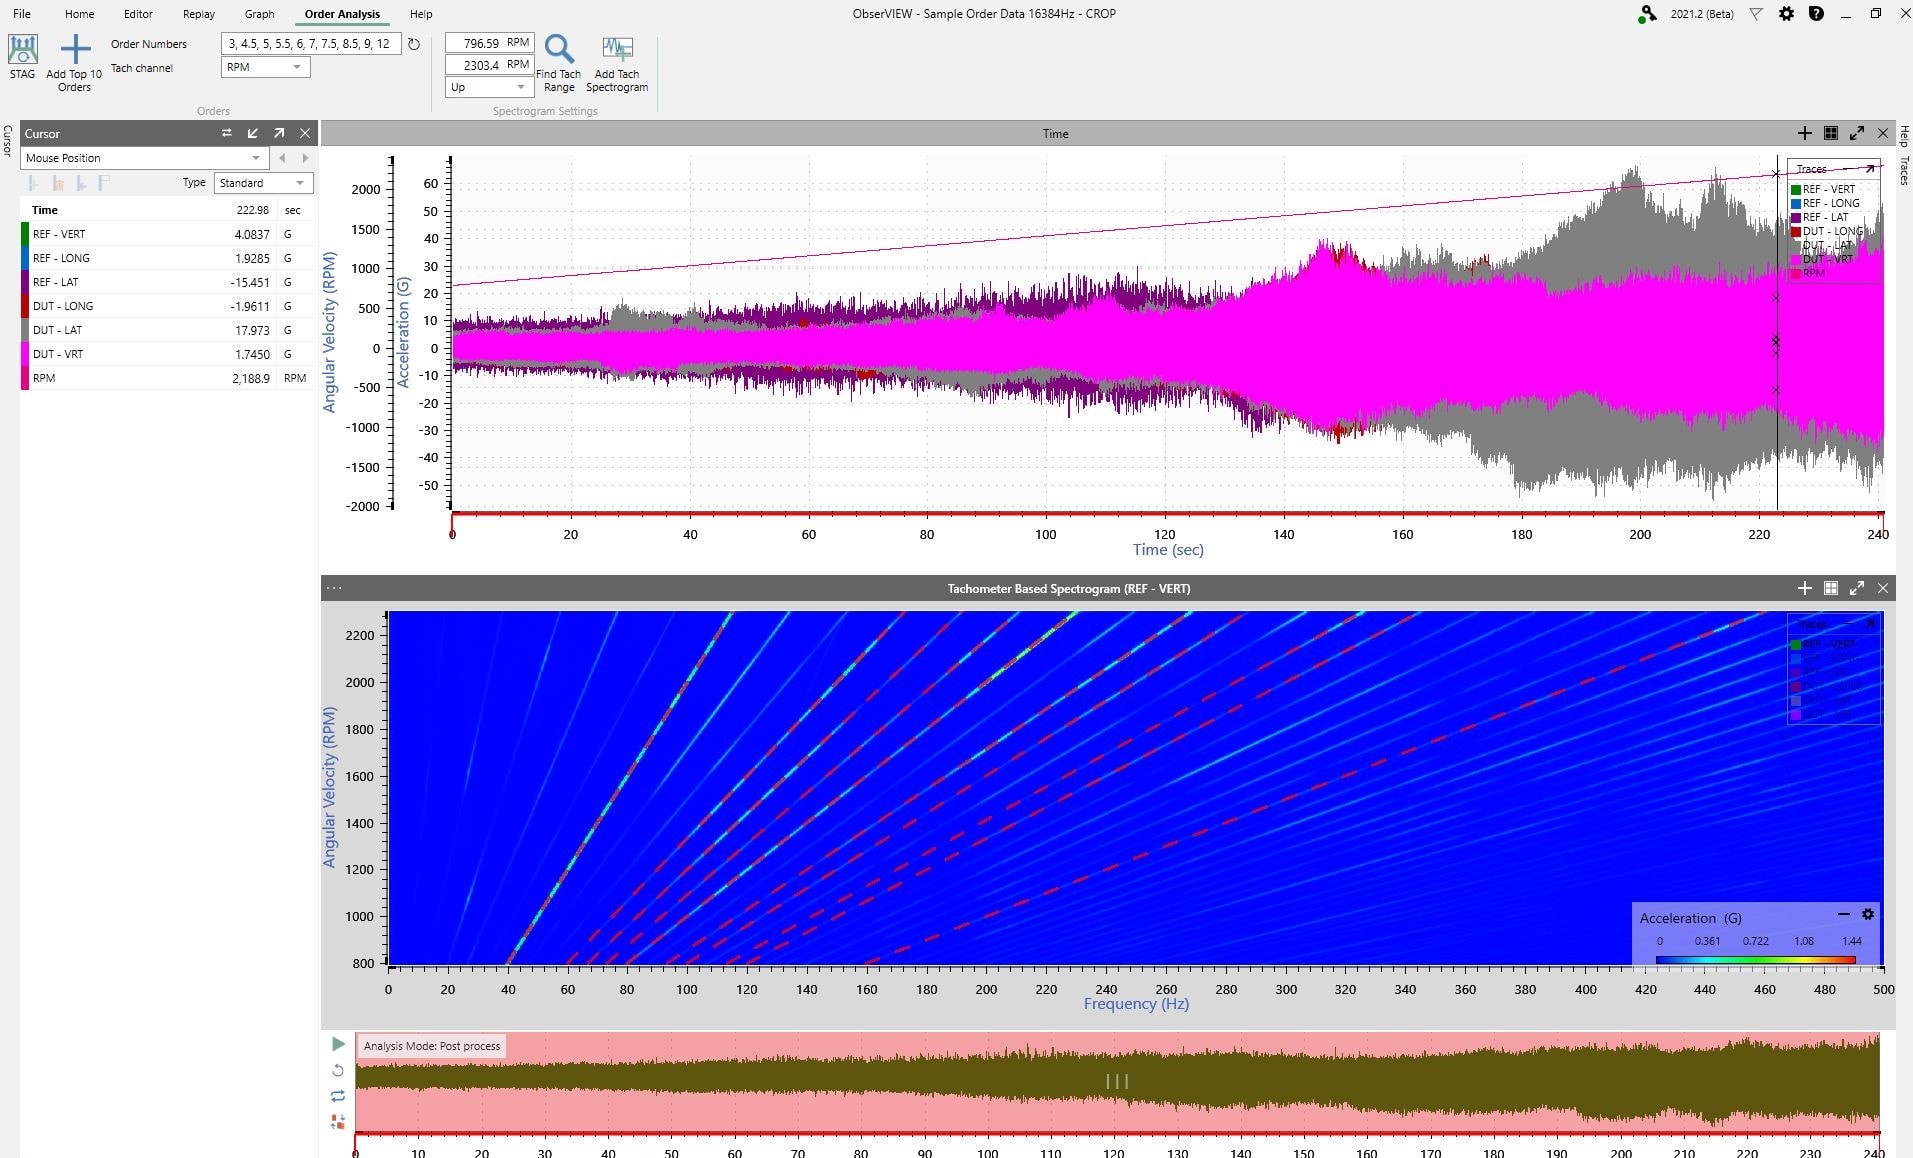 A screenshot of the ObserVIEW software, including a time versus angular velocity graph and a tachometer-based spectrogram.